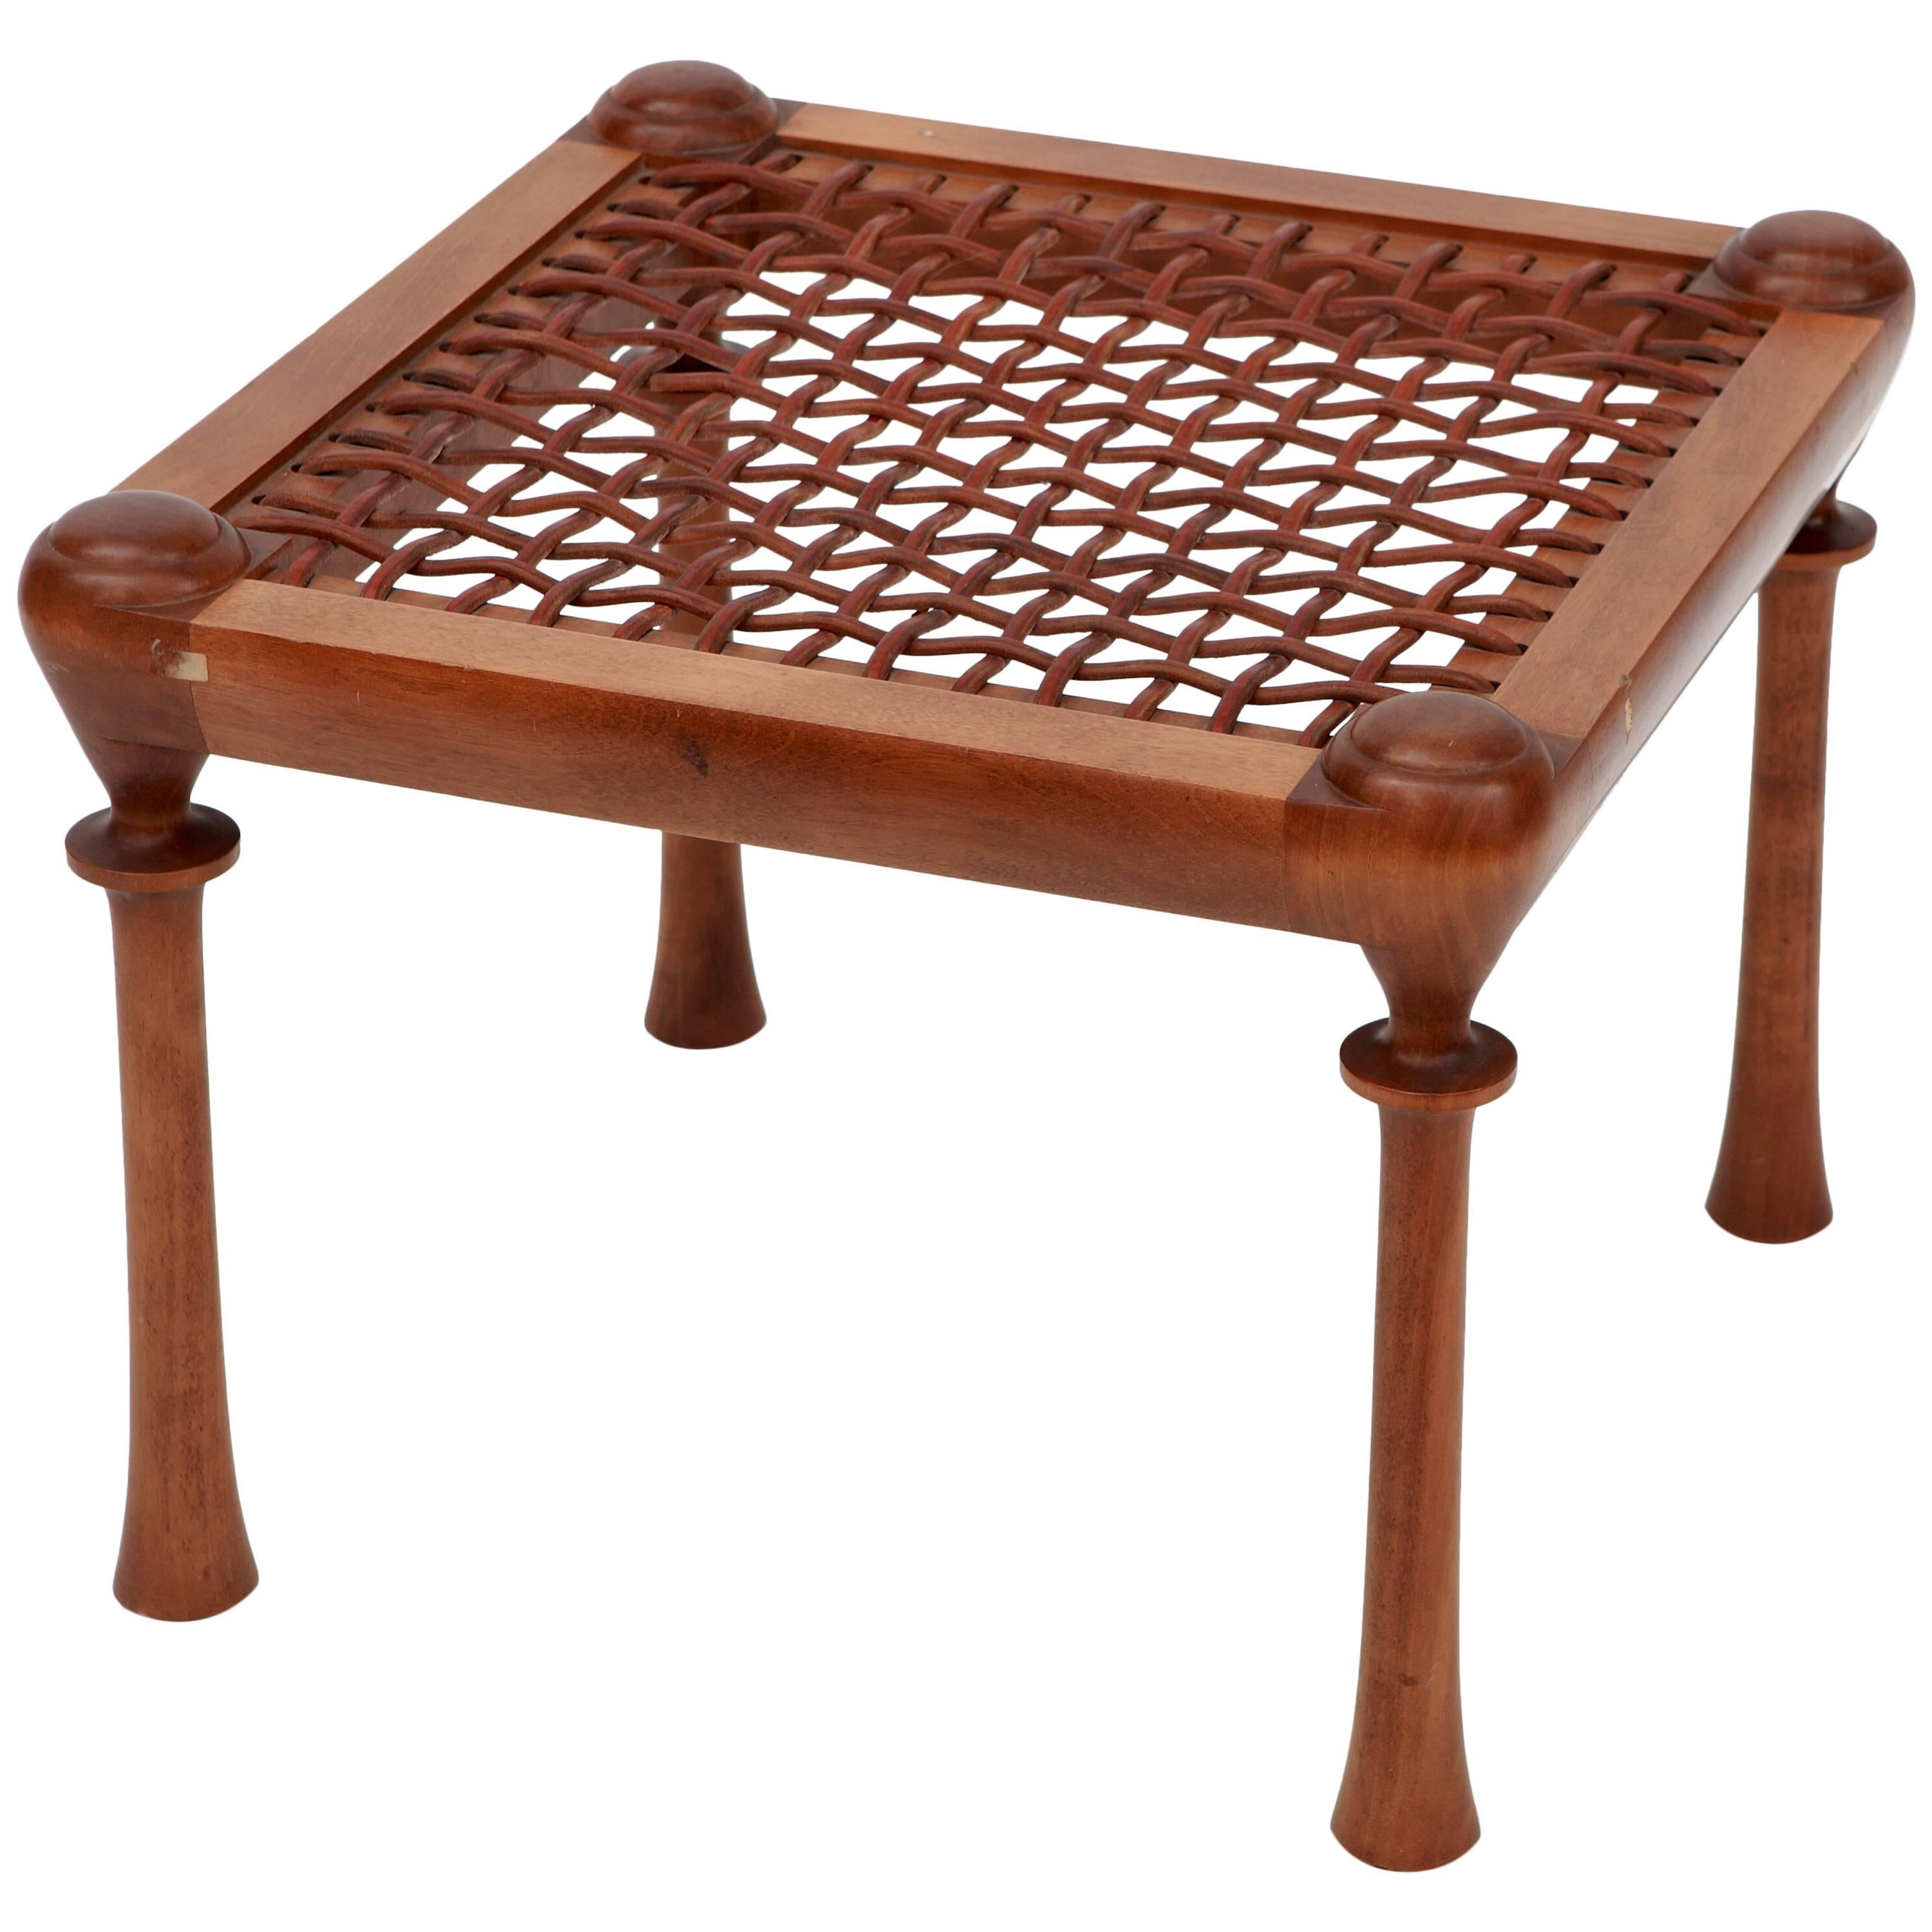 Four-Legged Walnut Stool with Interlaced Leather Straps Inside the Frame For Sale